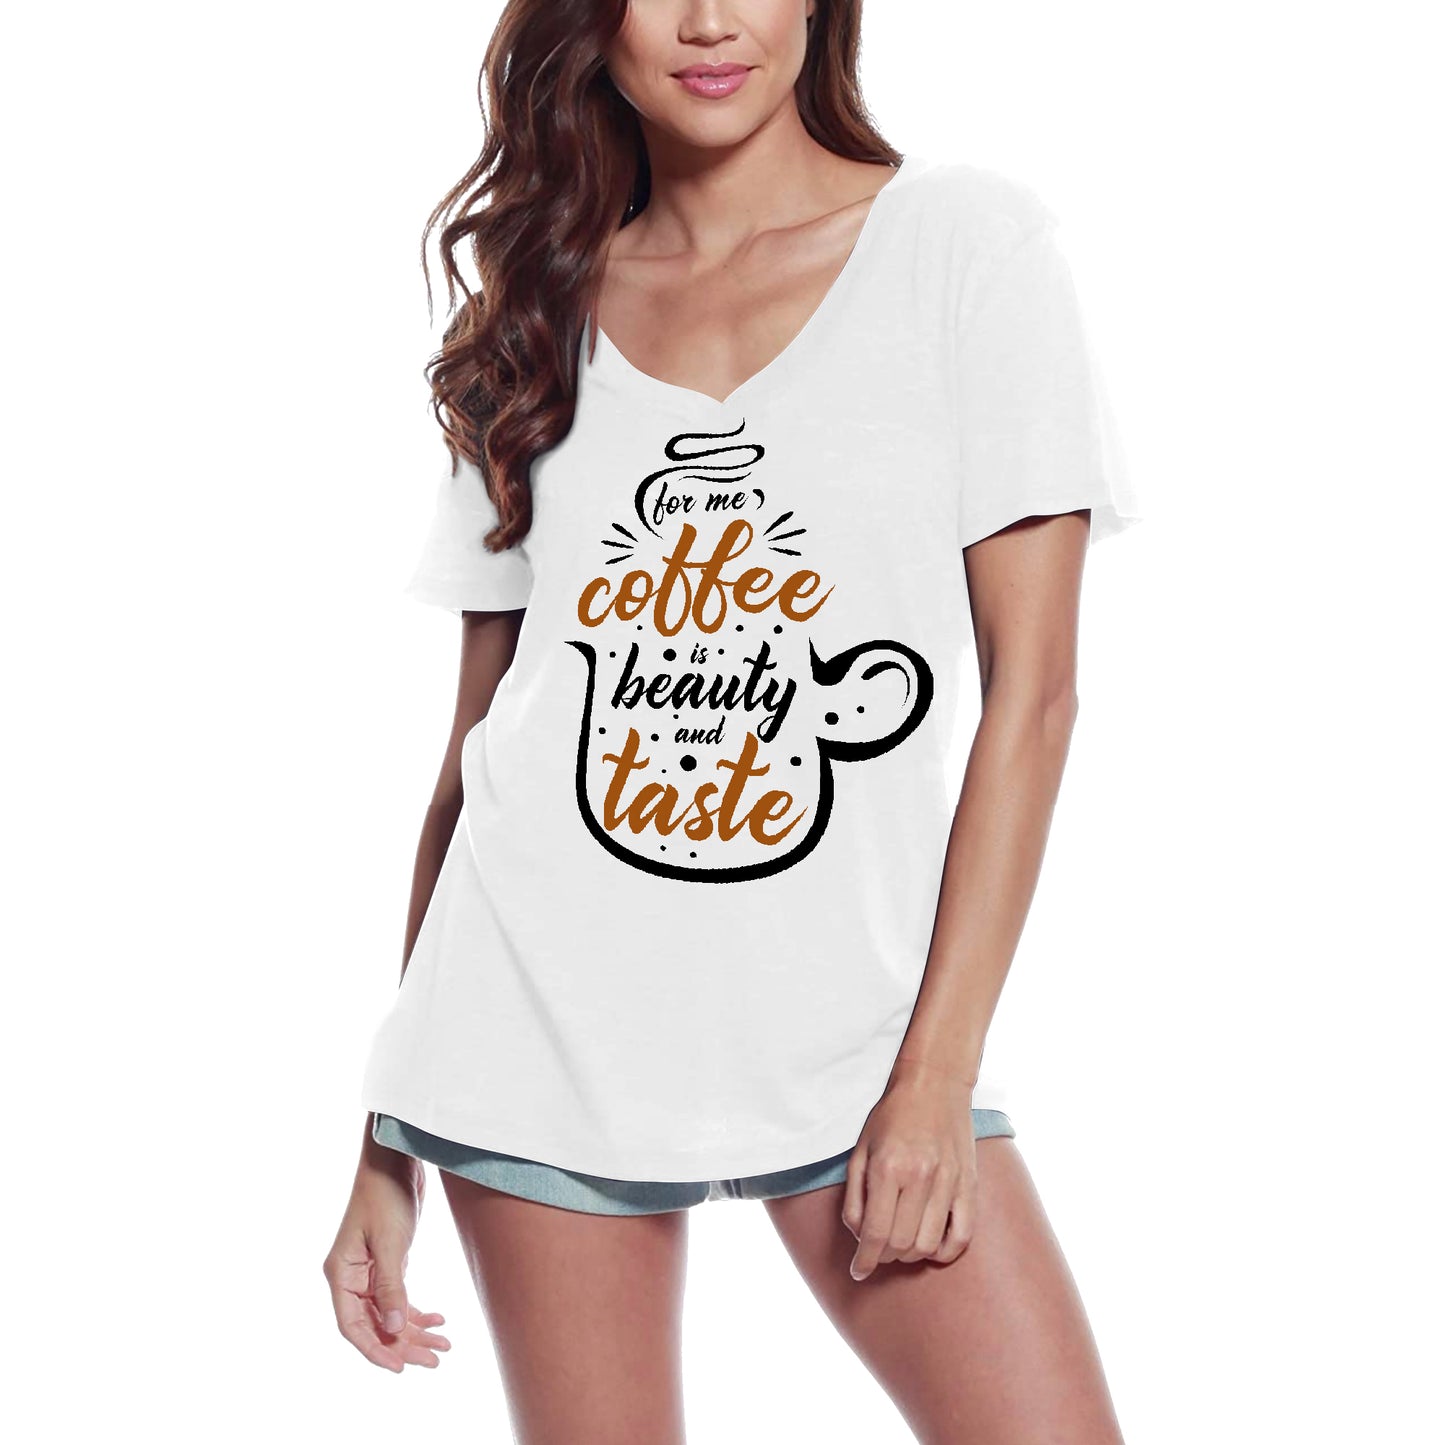 ULTRABASIC Women's T-Shirt For Me Coffee is Beauty and Taste - Saying Shirt